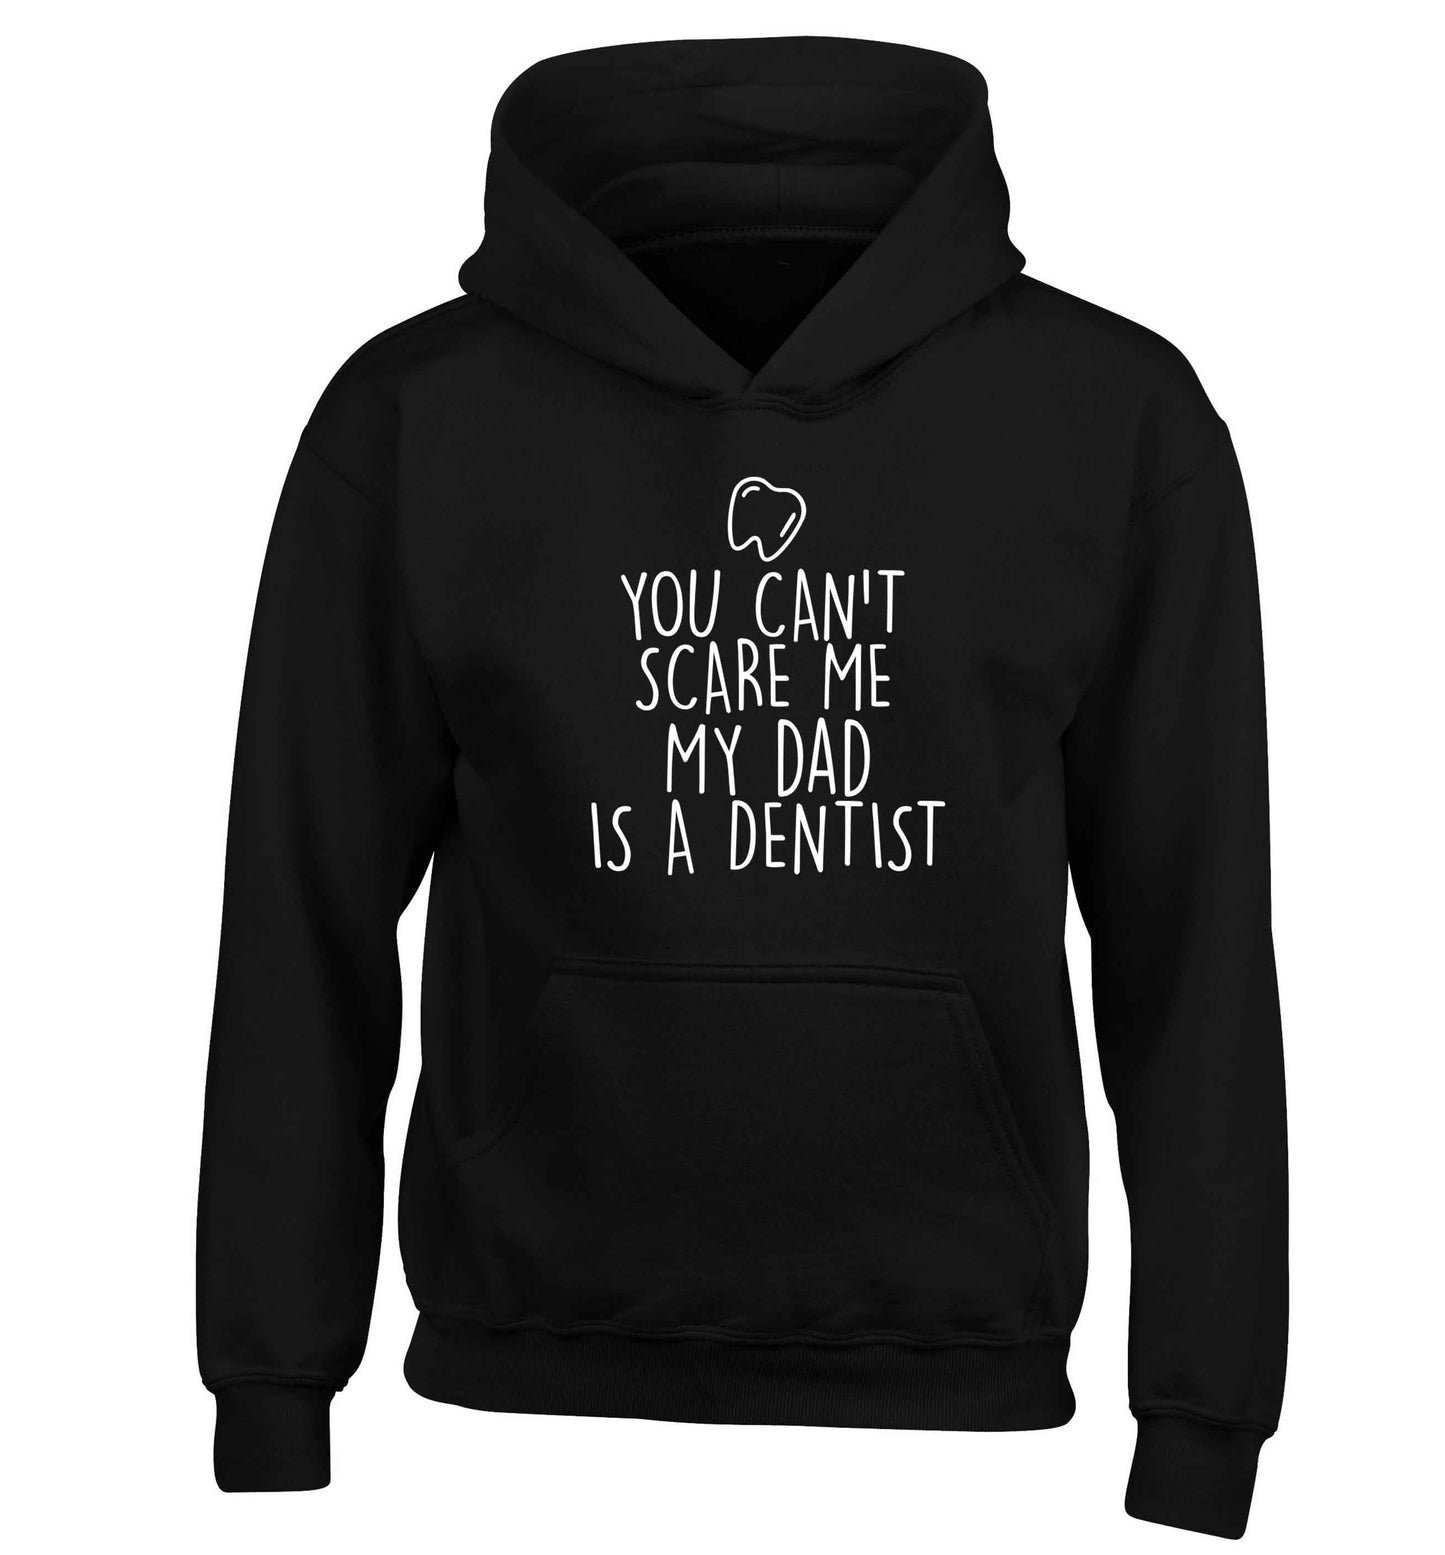 You can't scare me my dad is a dentist children's black hoodie 12-13 Years